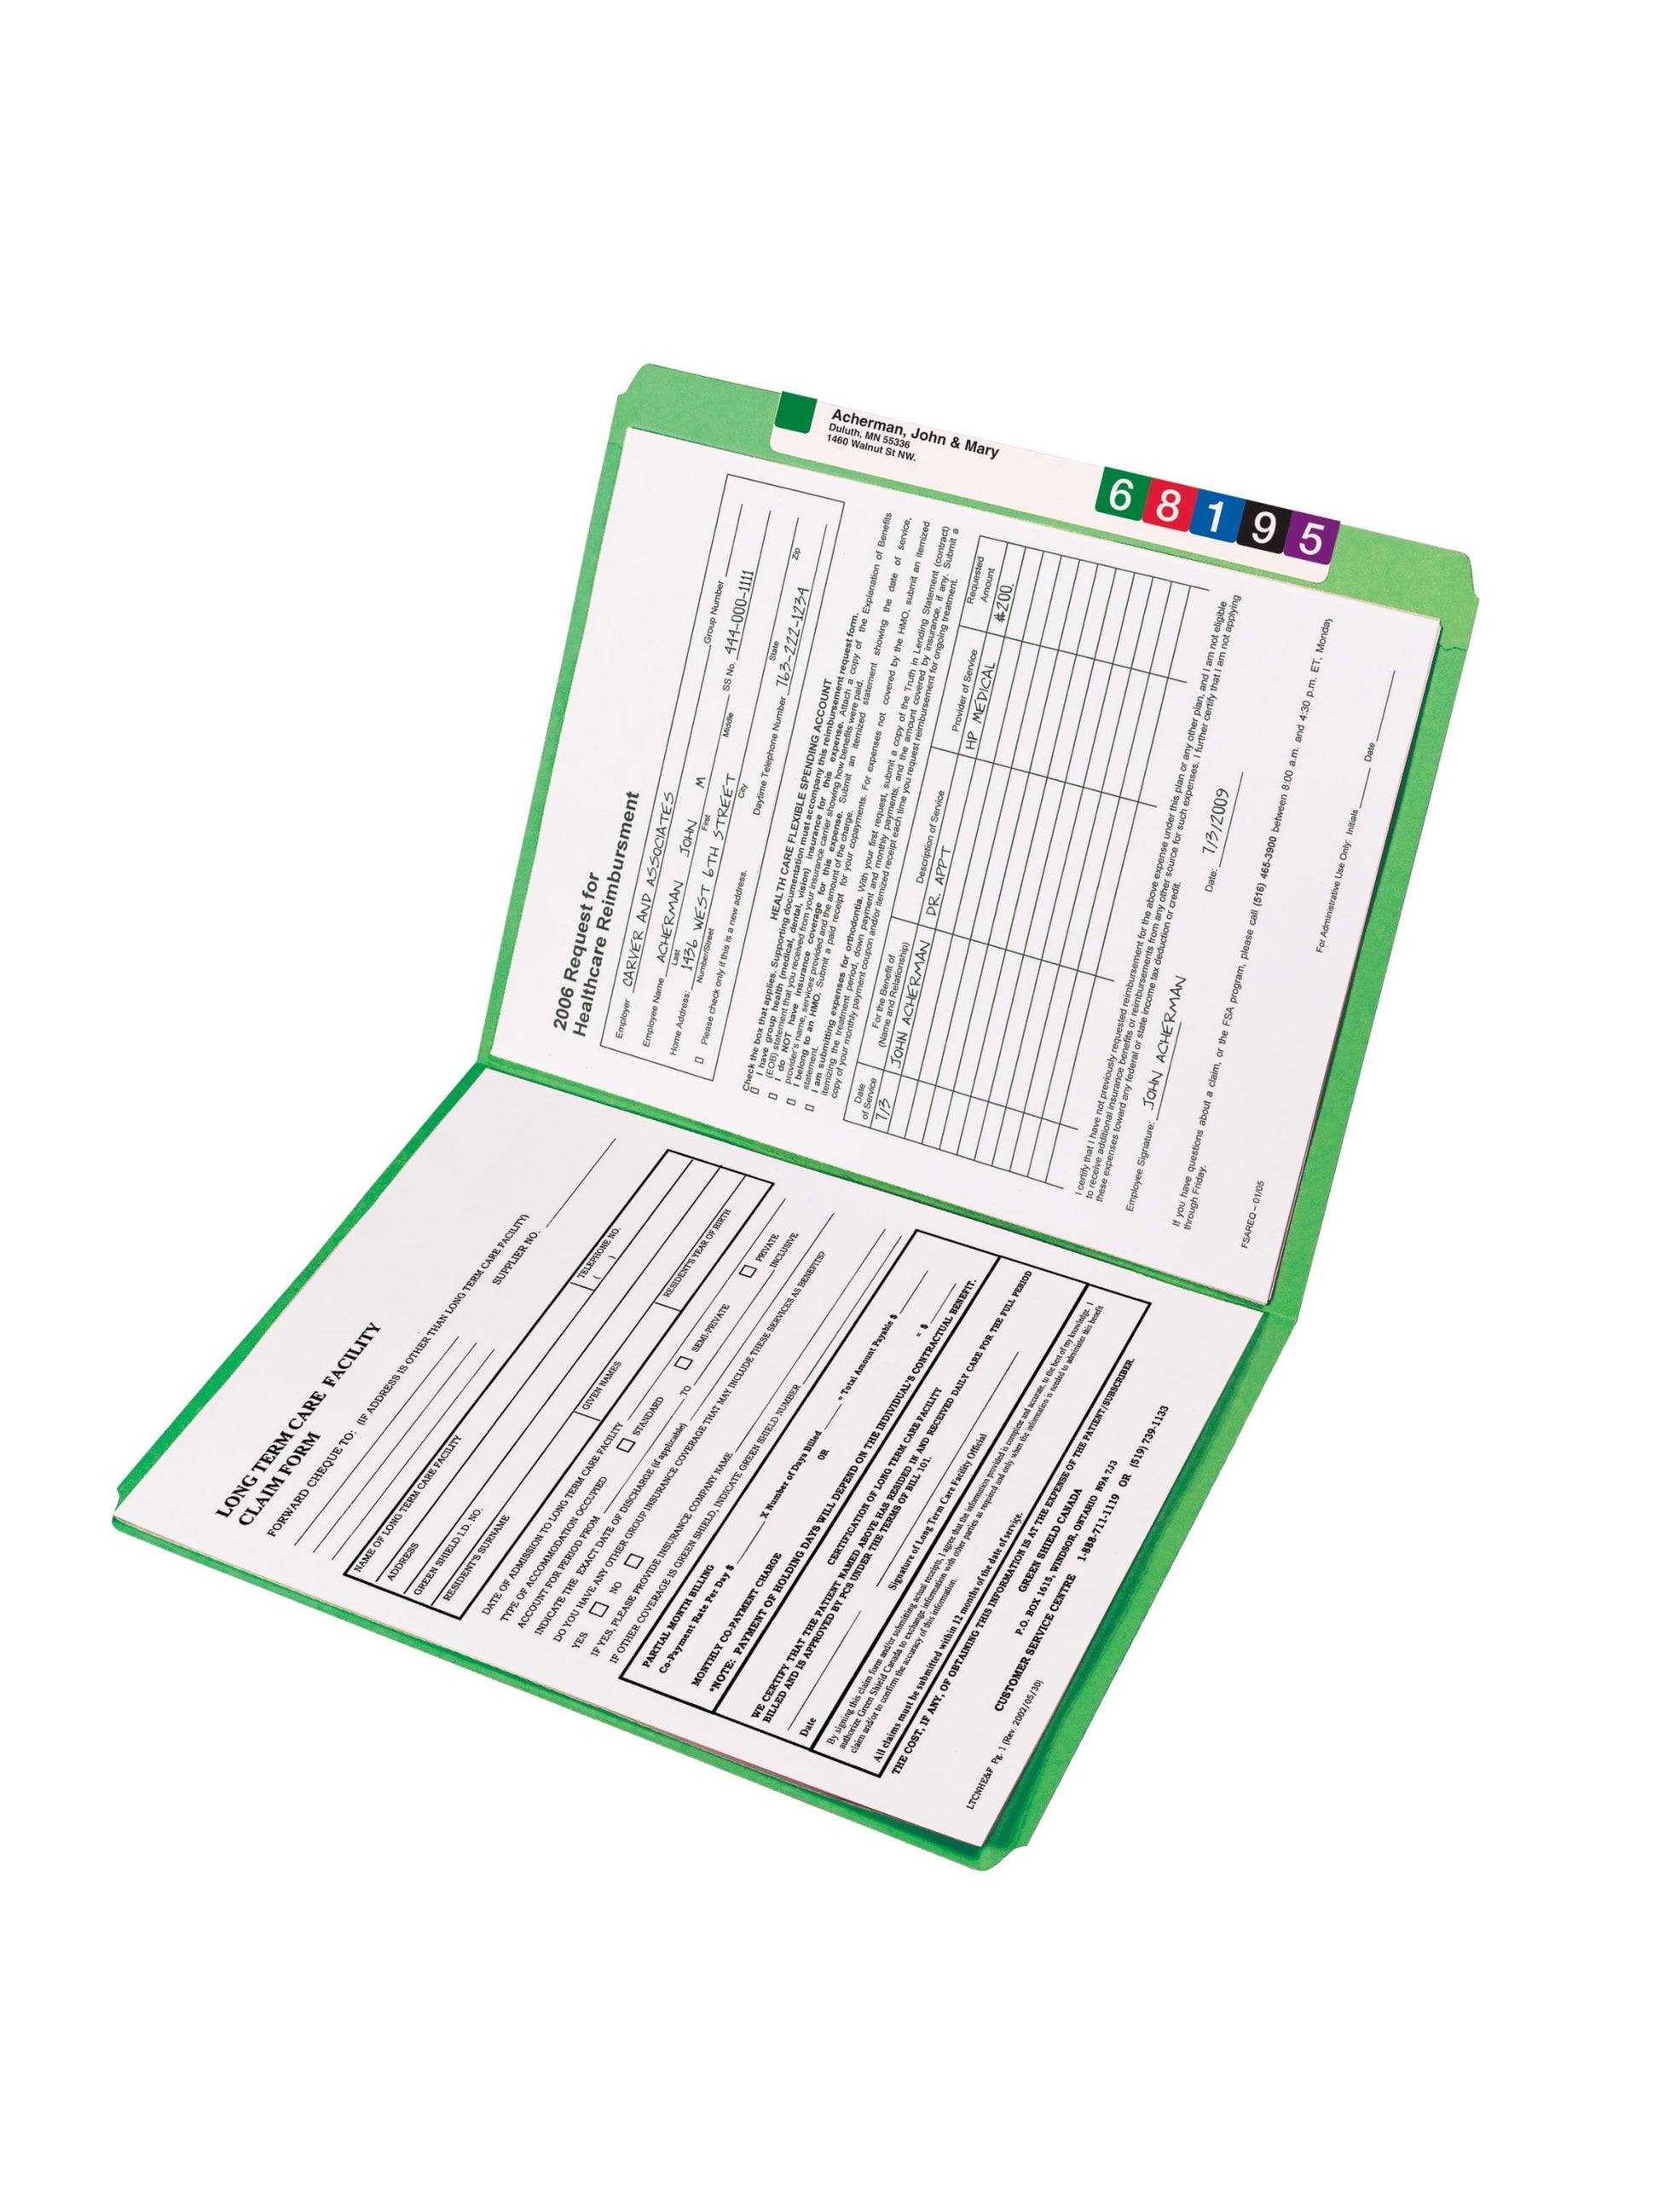 Reinforced Tab File Folders, Straight-Cut Tab, Green Color, Letter Size, Set of 100, 086486121101